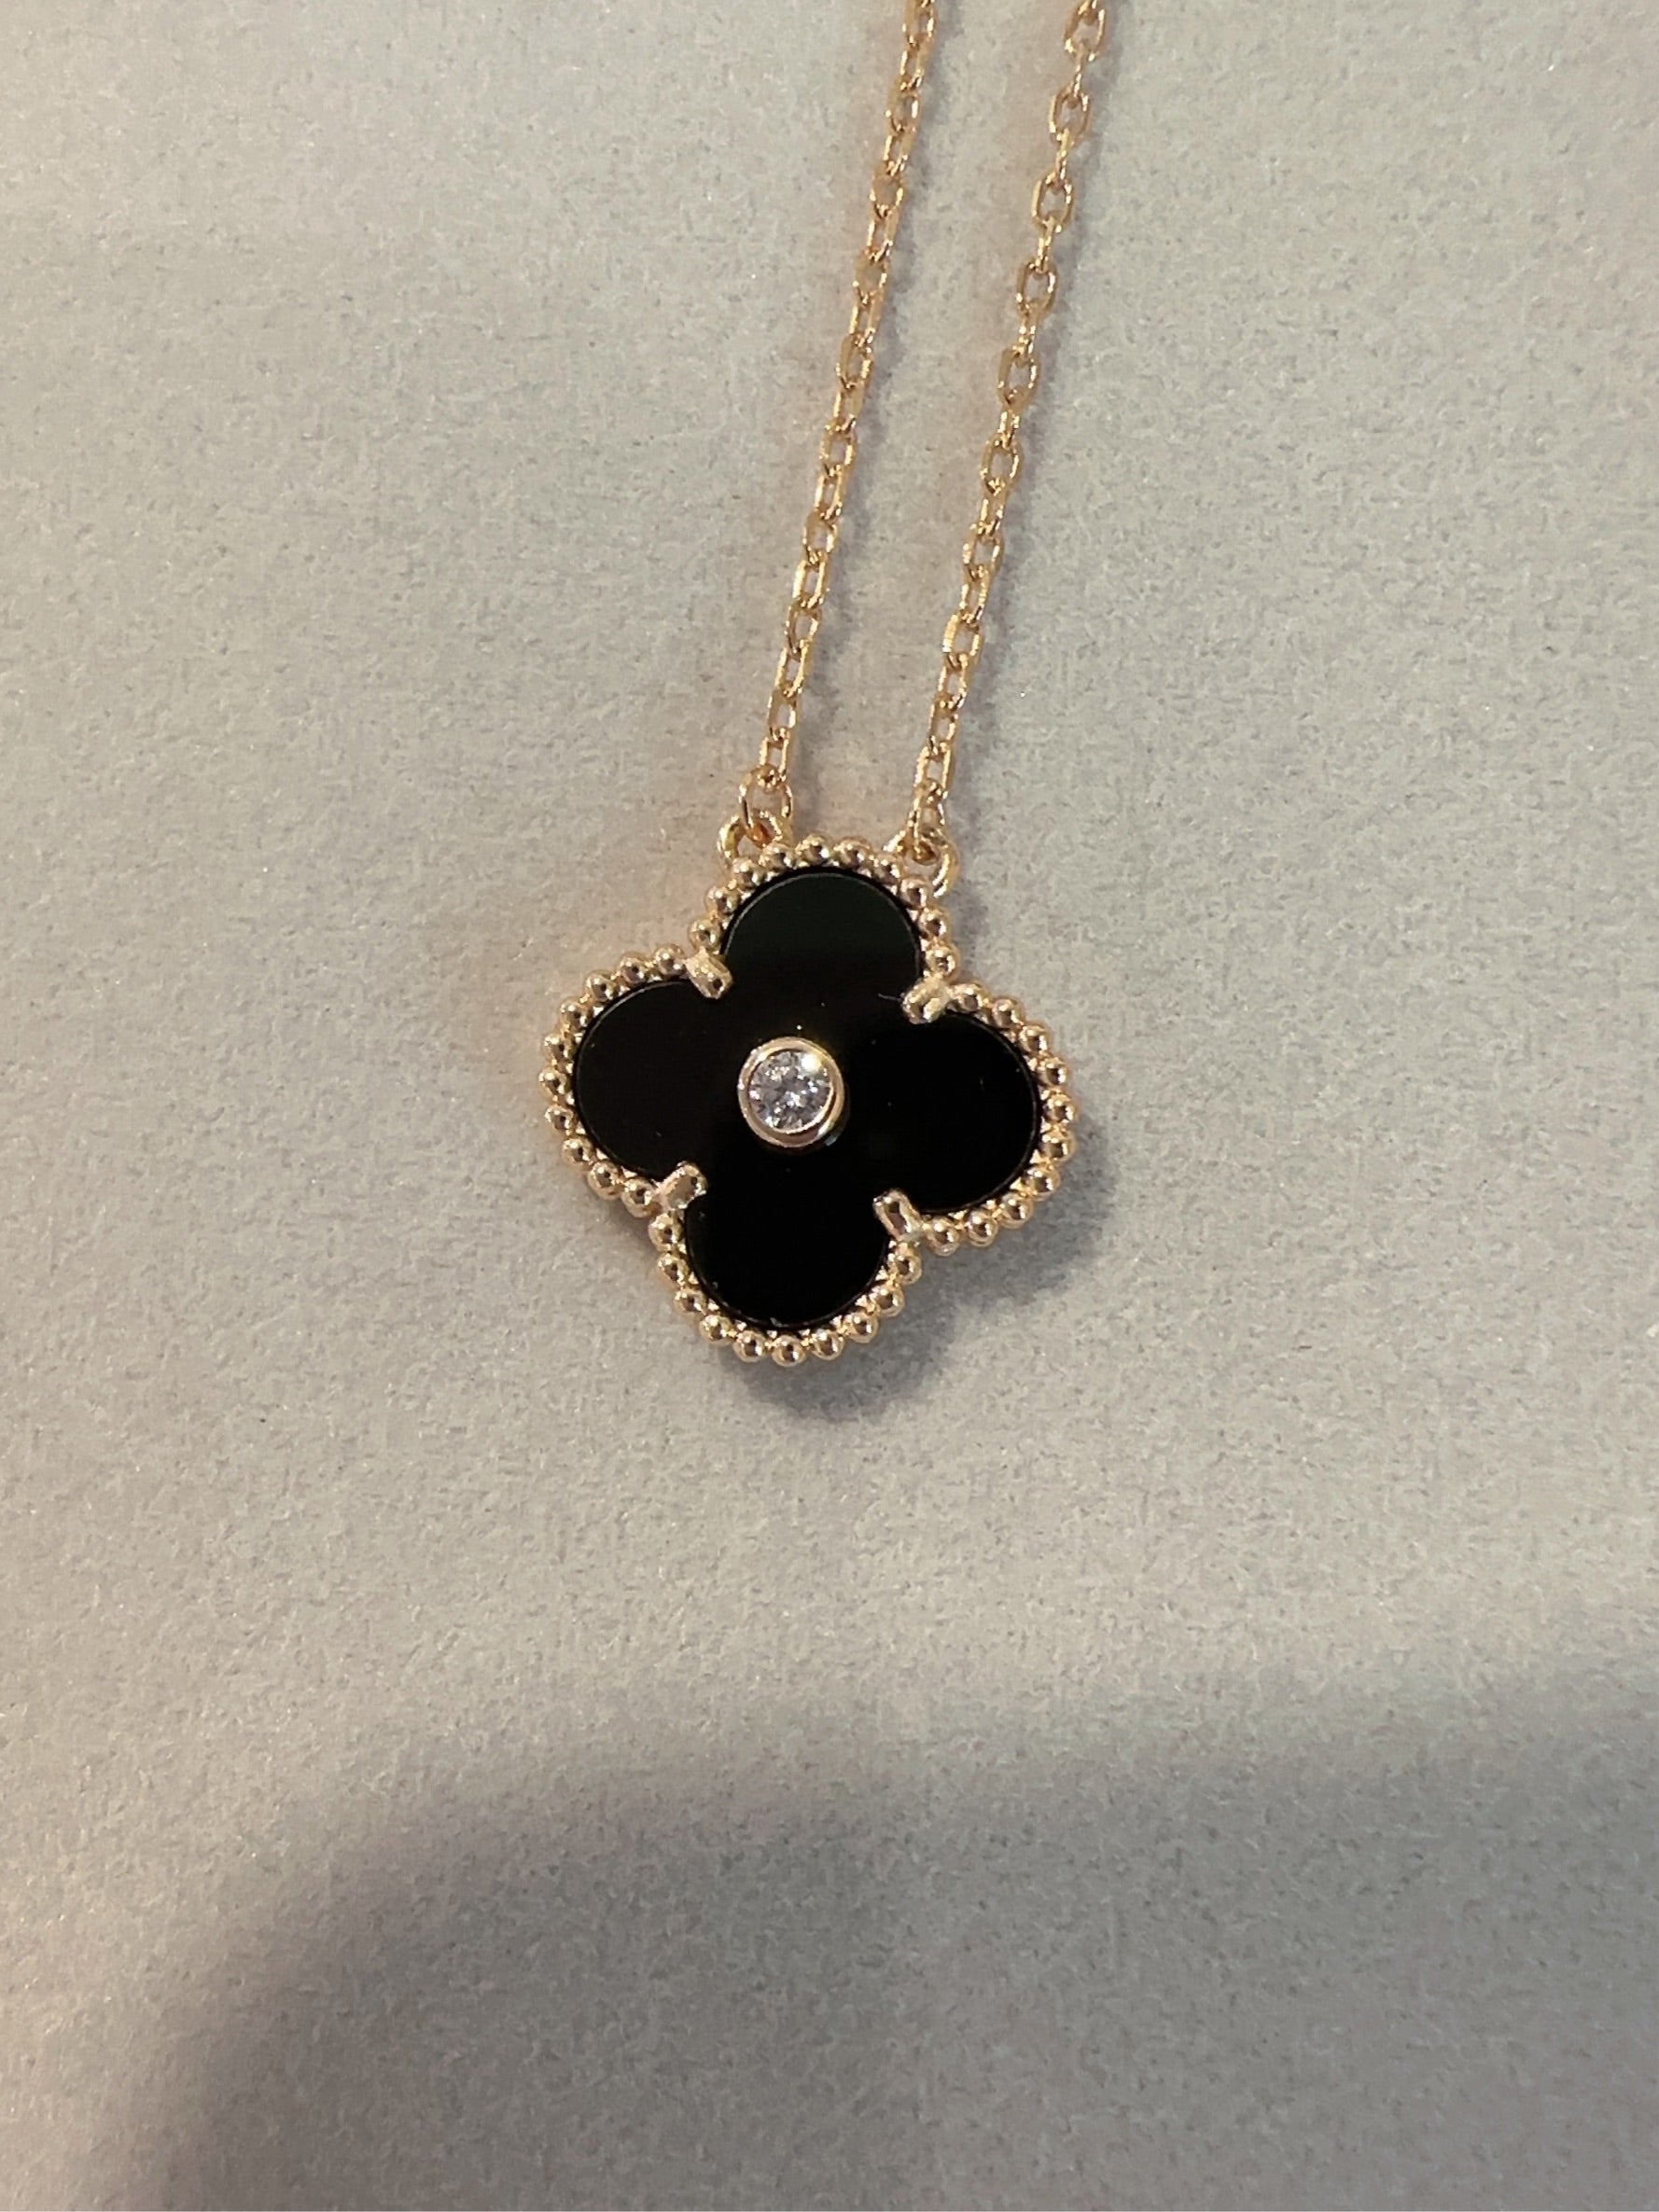 15mm Clover Necklace, Gold Plated, 925 Sterling Silver, Mother of Pearl, Onyx, Handcrafted Gift for Her - ParadiseKissCo